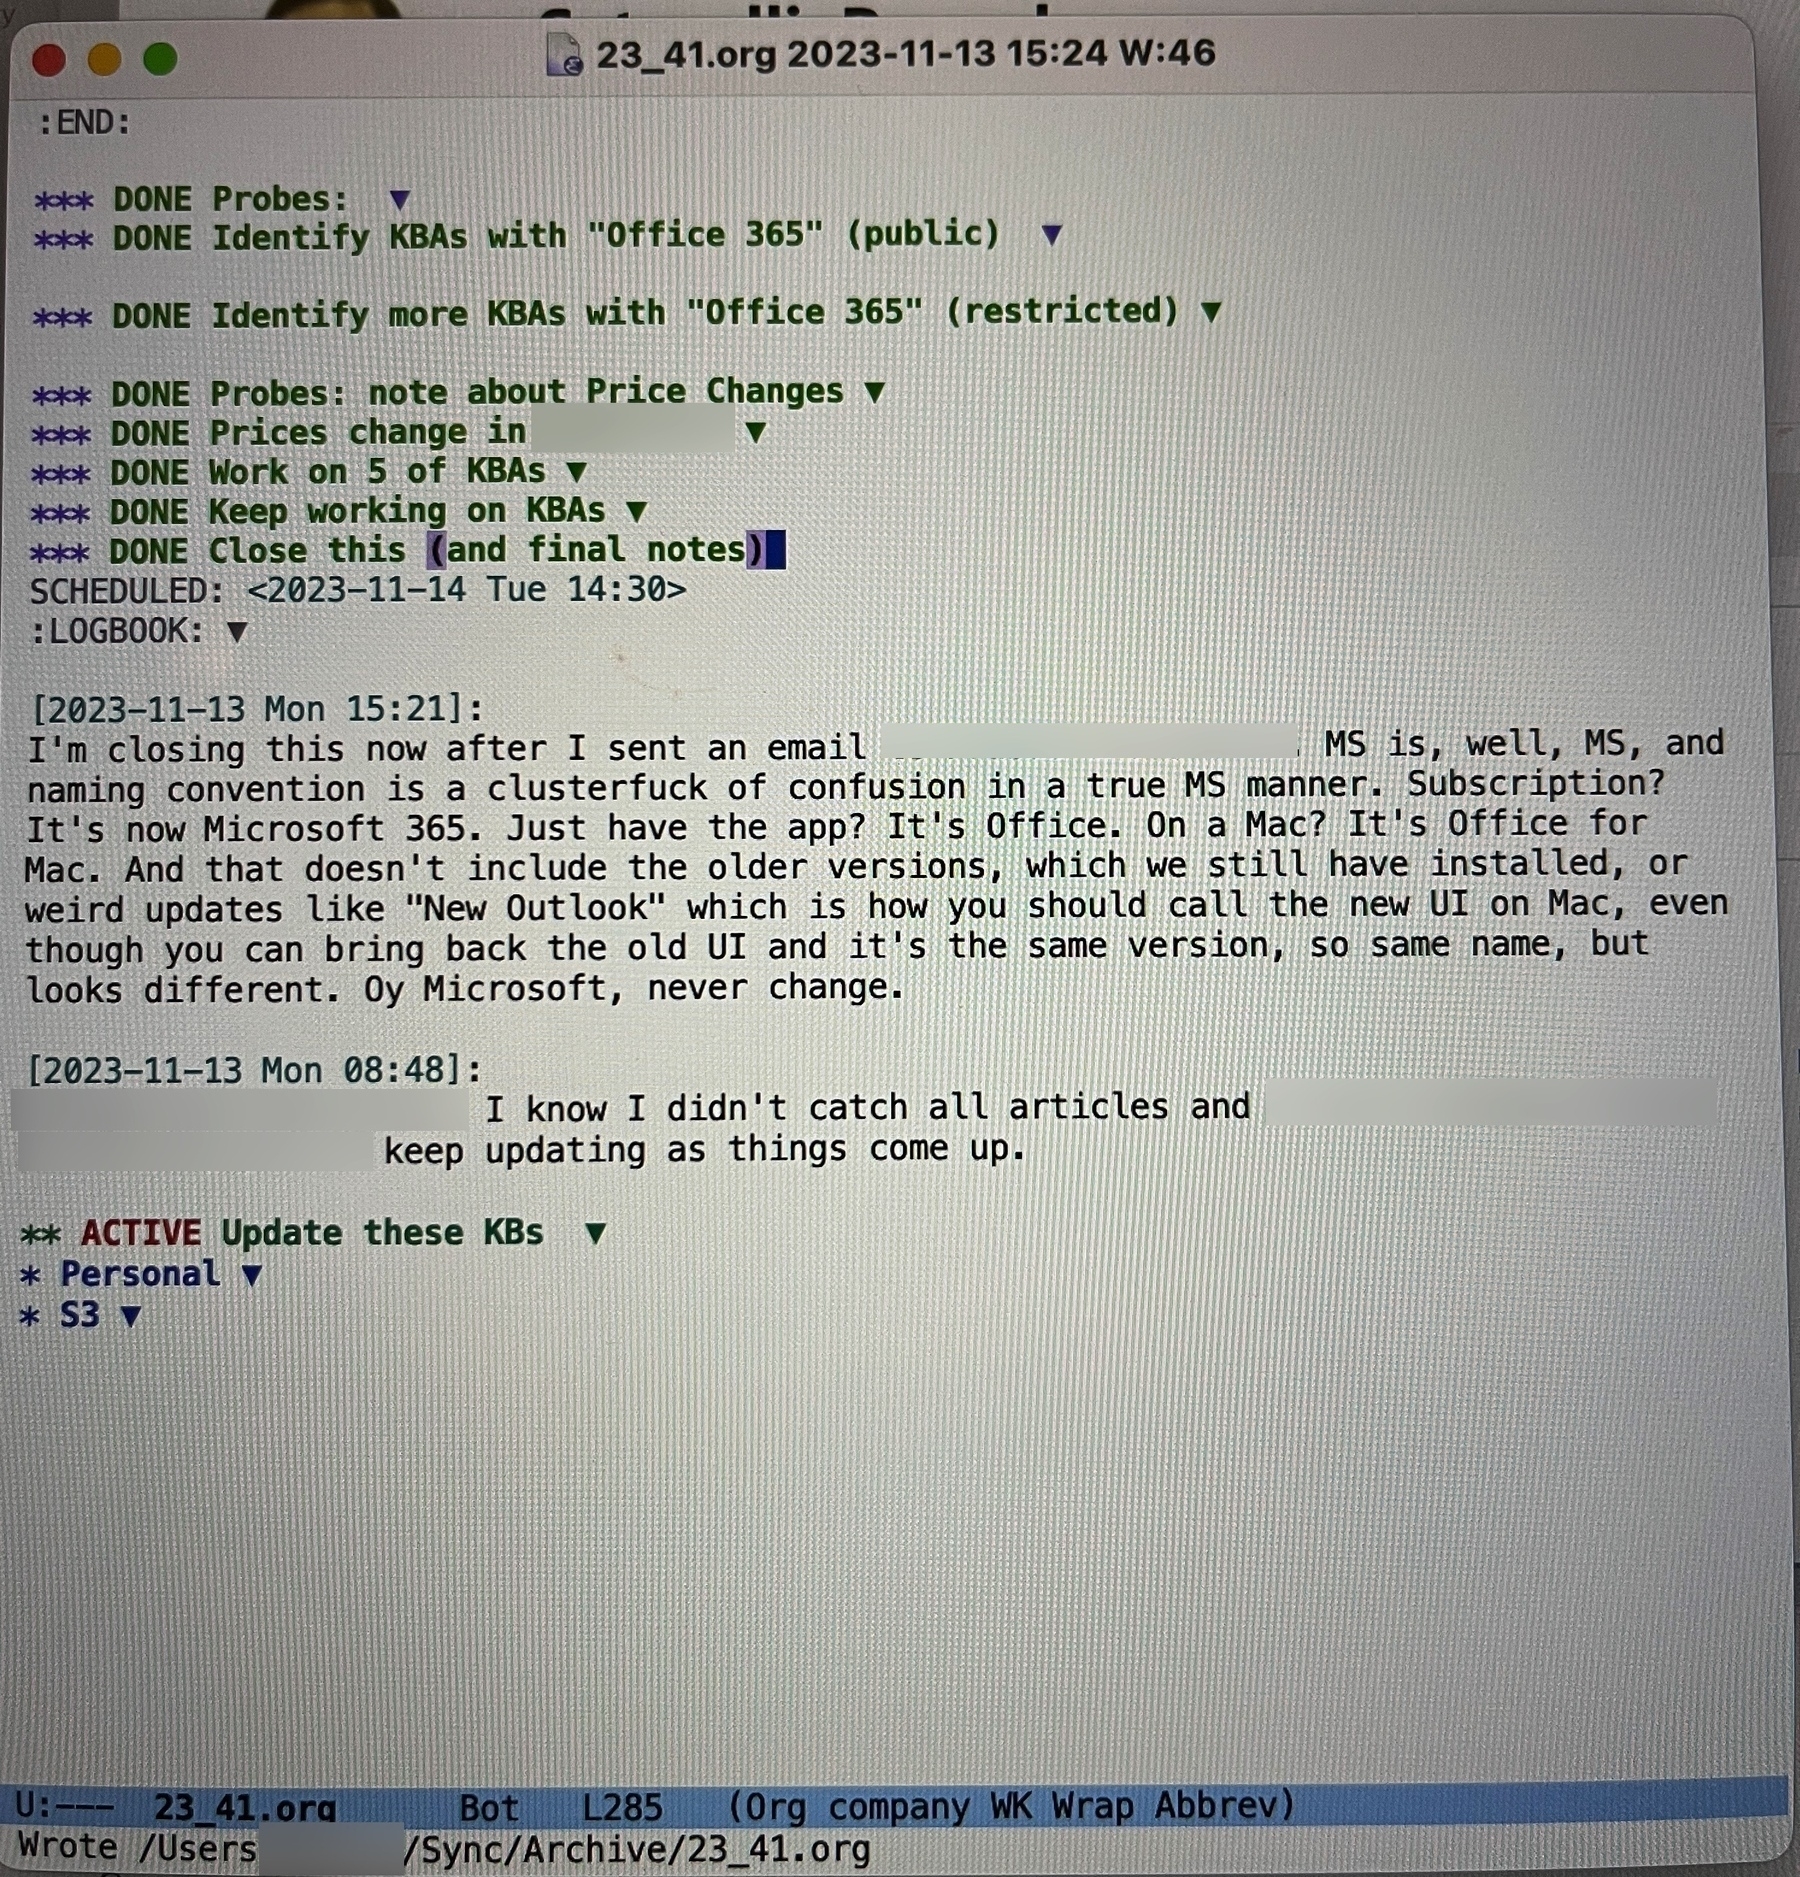 A screenshot of personal notes in Emacs, complaining about Microsoft's confusing brand names when it comes to its products. The notes specify a couple of examples, such as Microsoft 365, Microsoft Office, Office for Mac, etc.